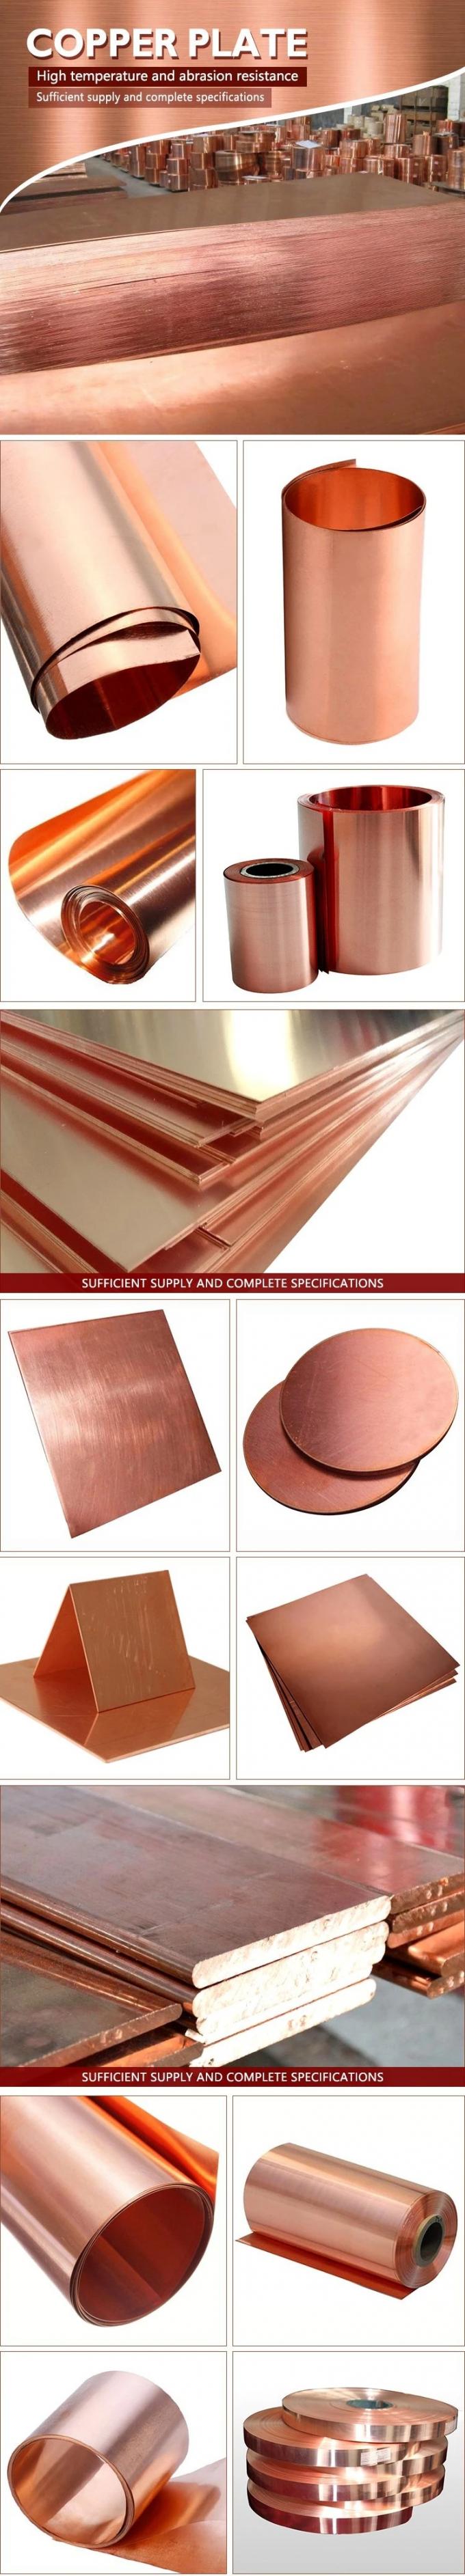 0.1 Mm 0.2 Mm 0.3 Mm Annealed Copper Sheet Plate Cu Electroplating Process 0